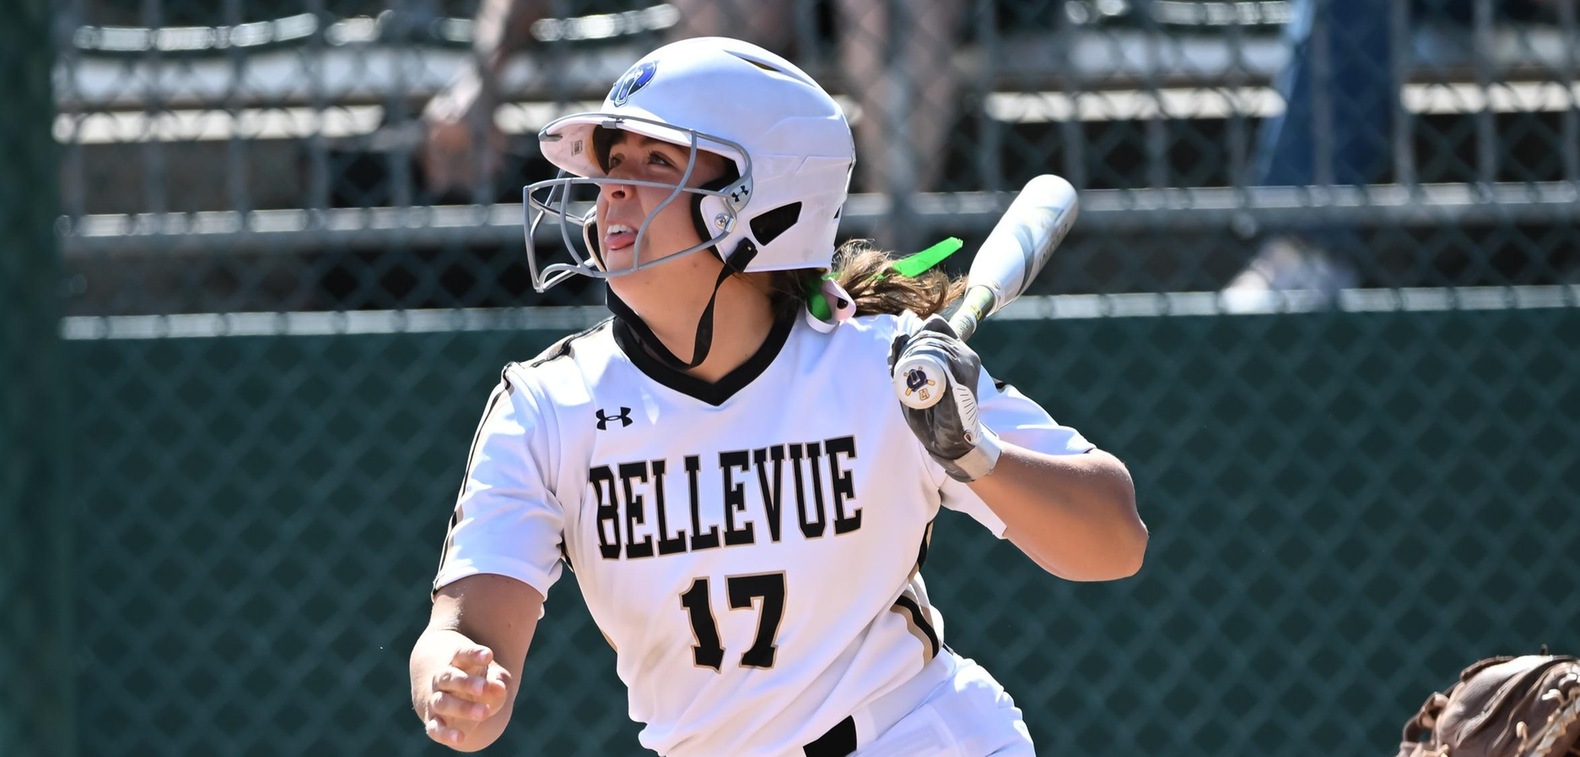 Lauren Jurek led the Bruins offensively, going 3-for-4 with three RBIs.